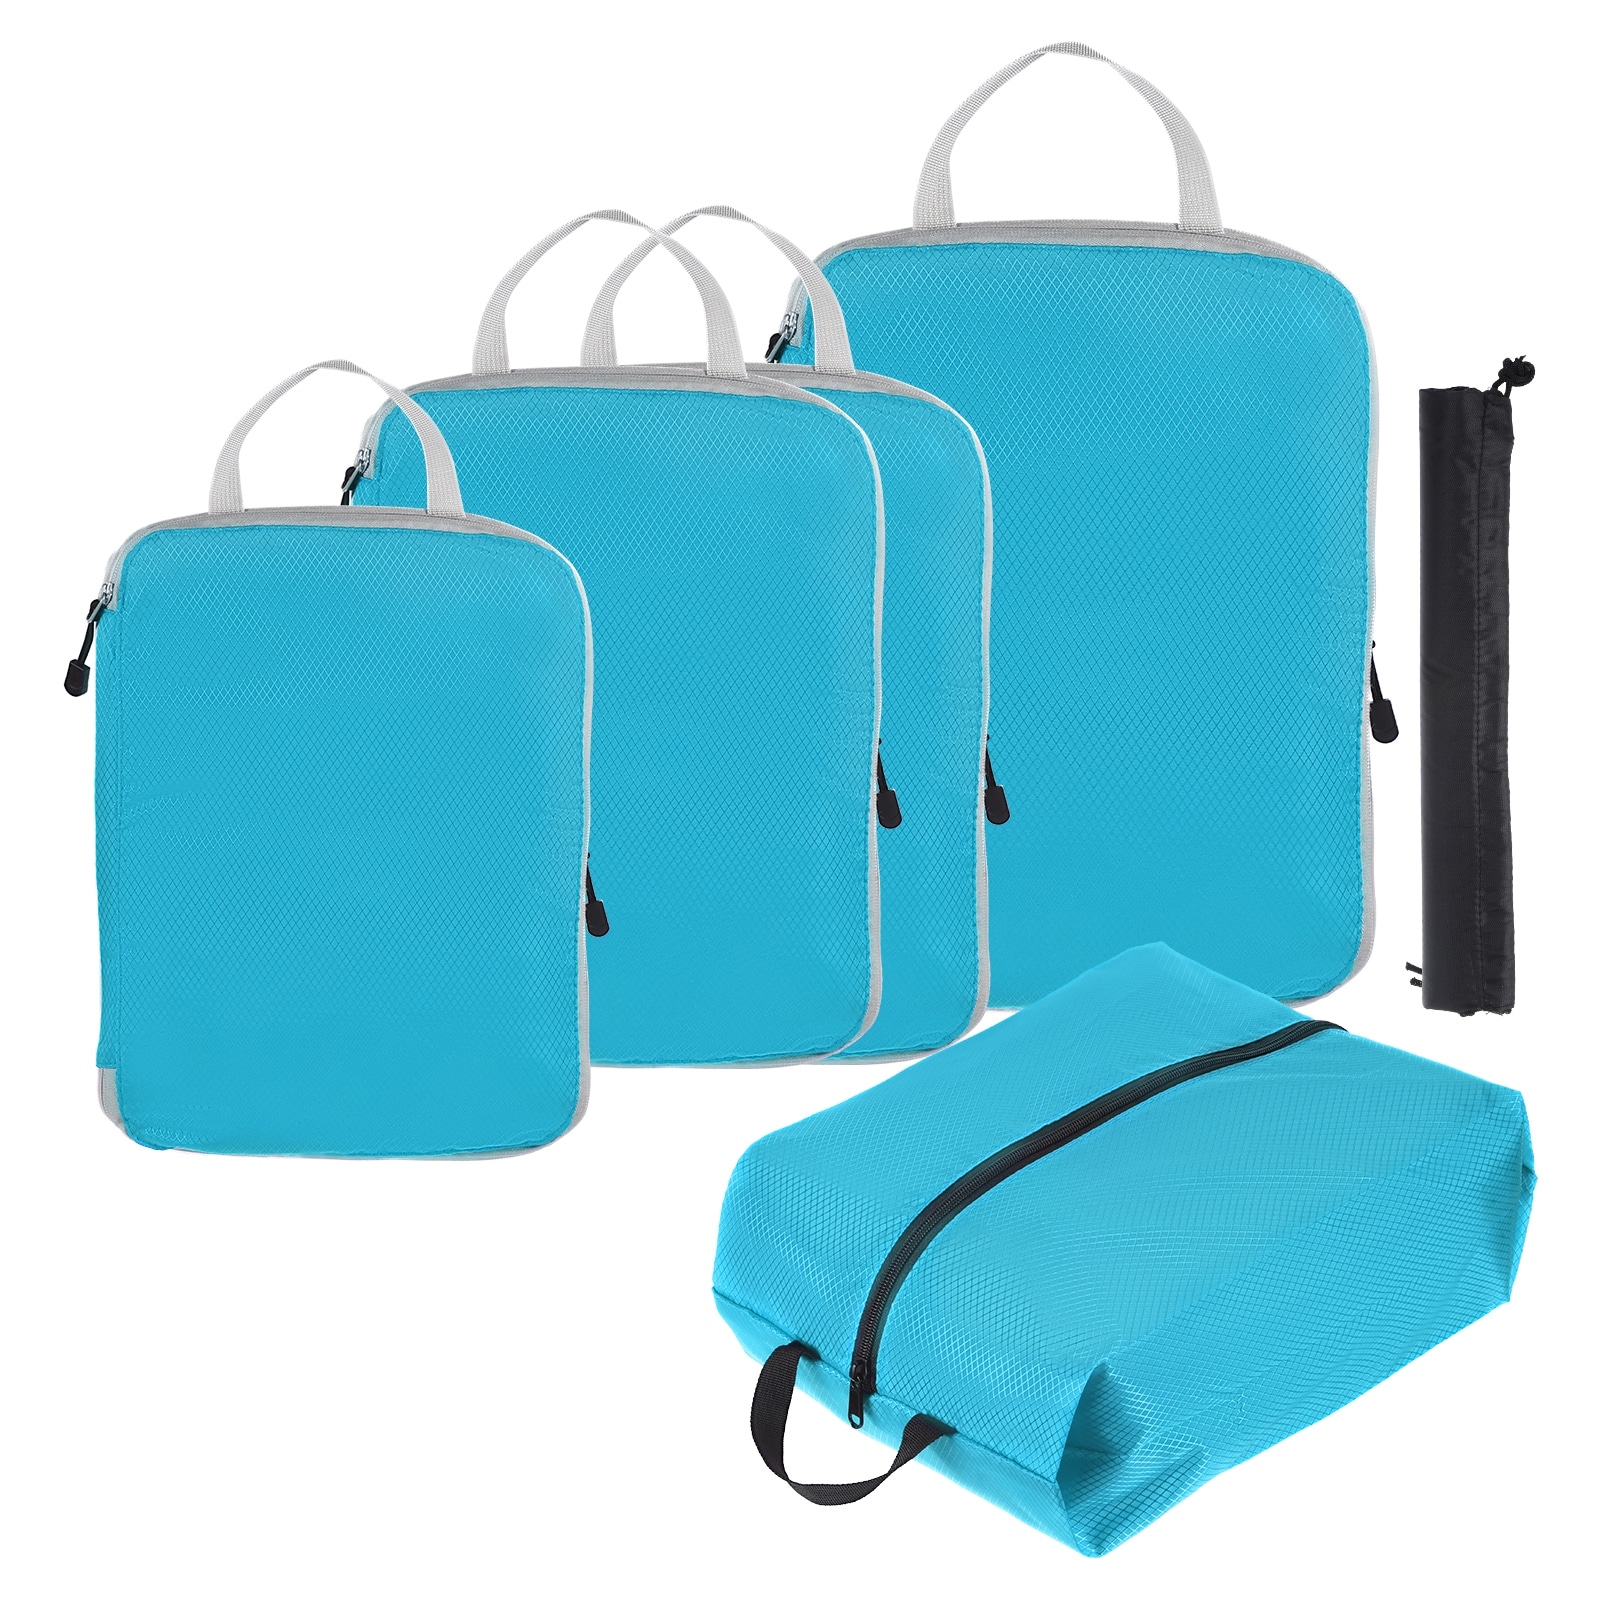 Packing Cube for Travel, Compression Bags Organizer for Luggage